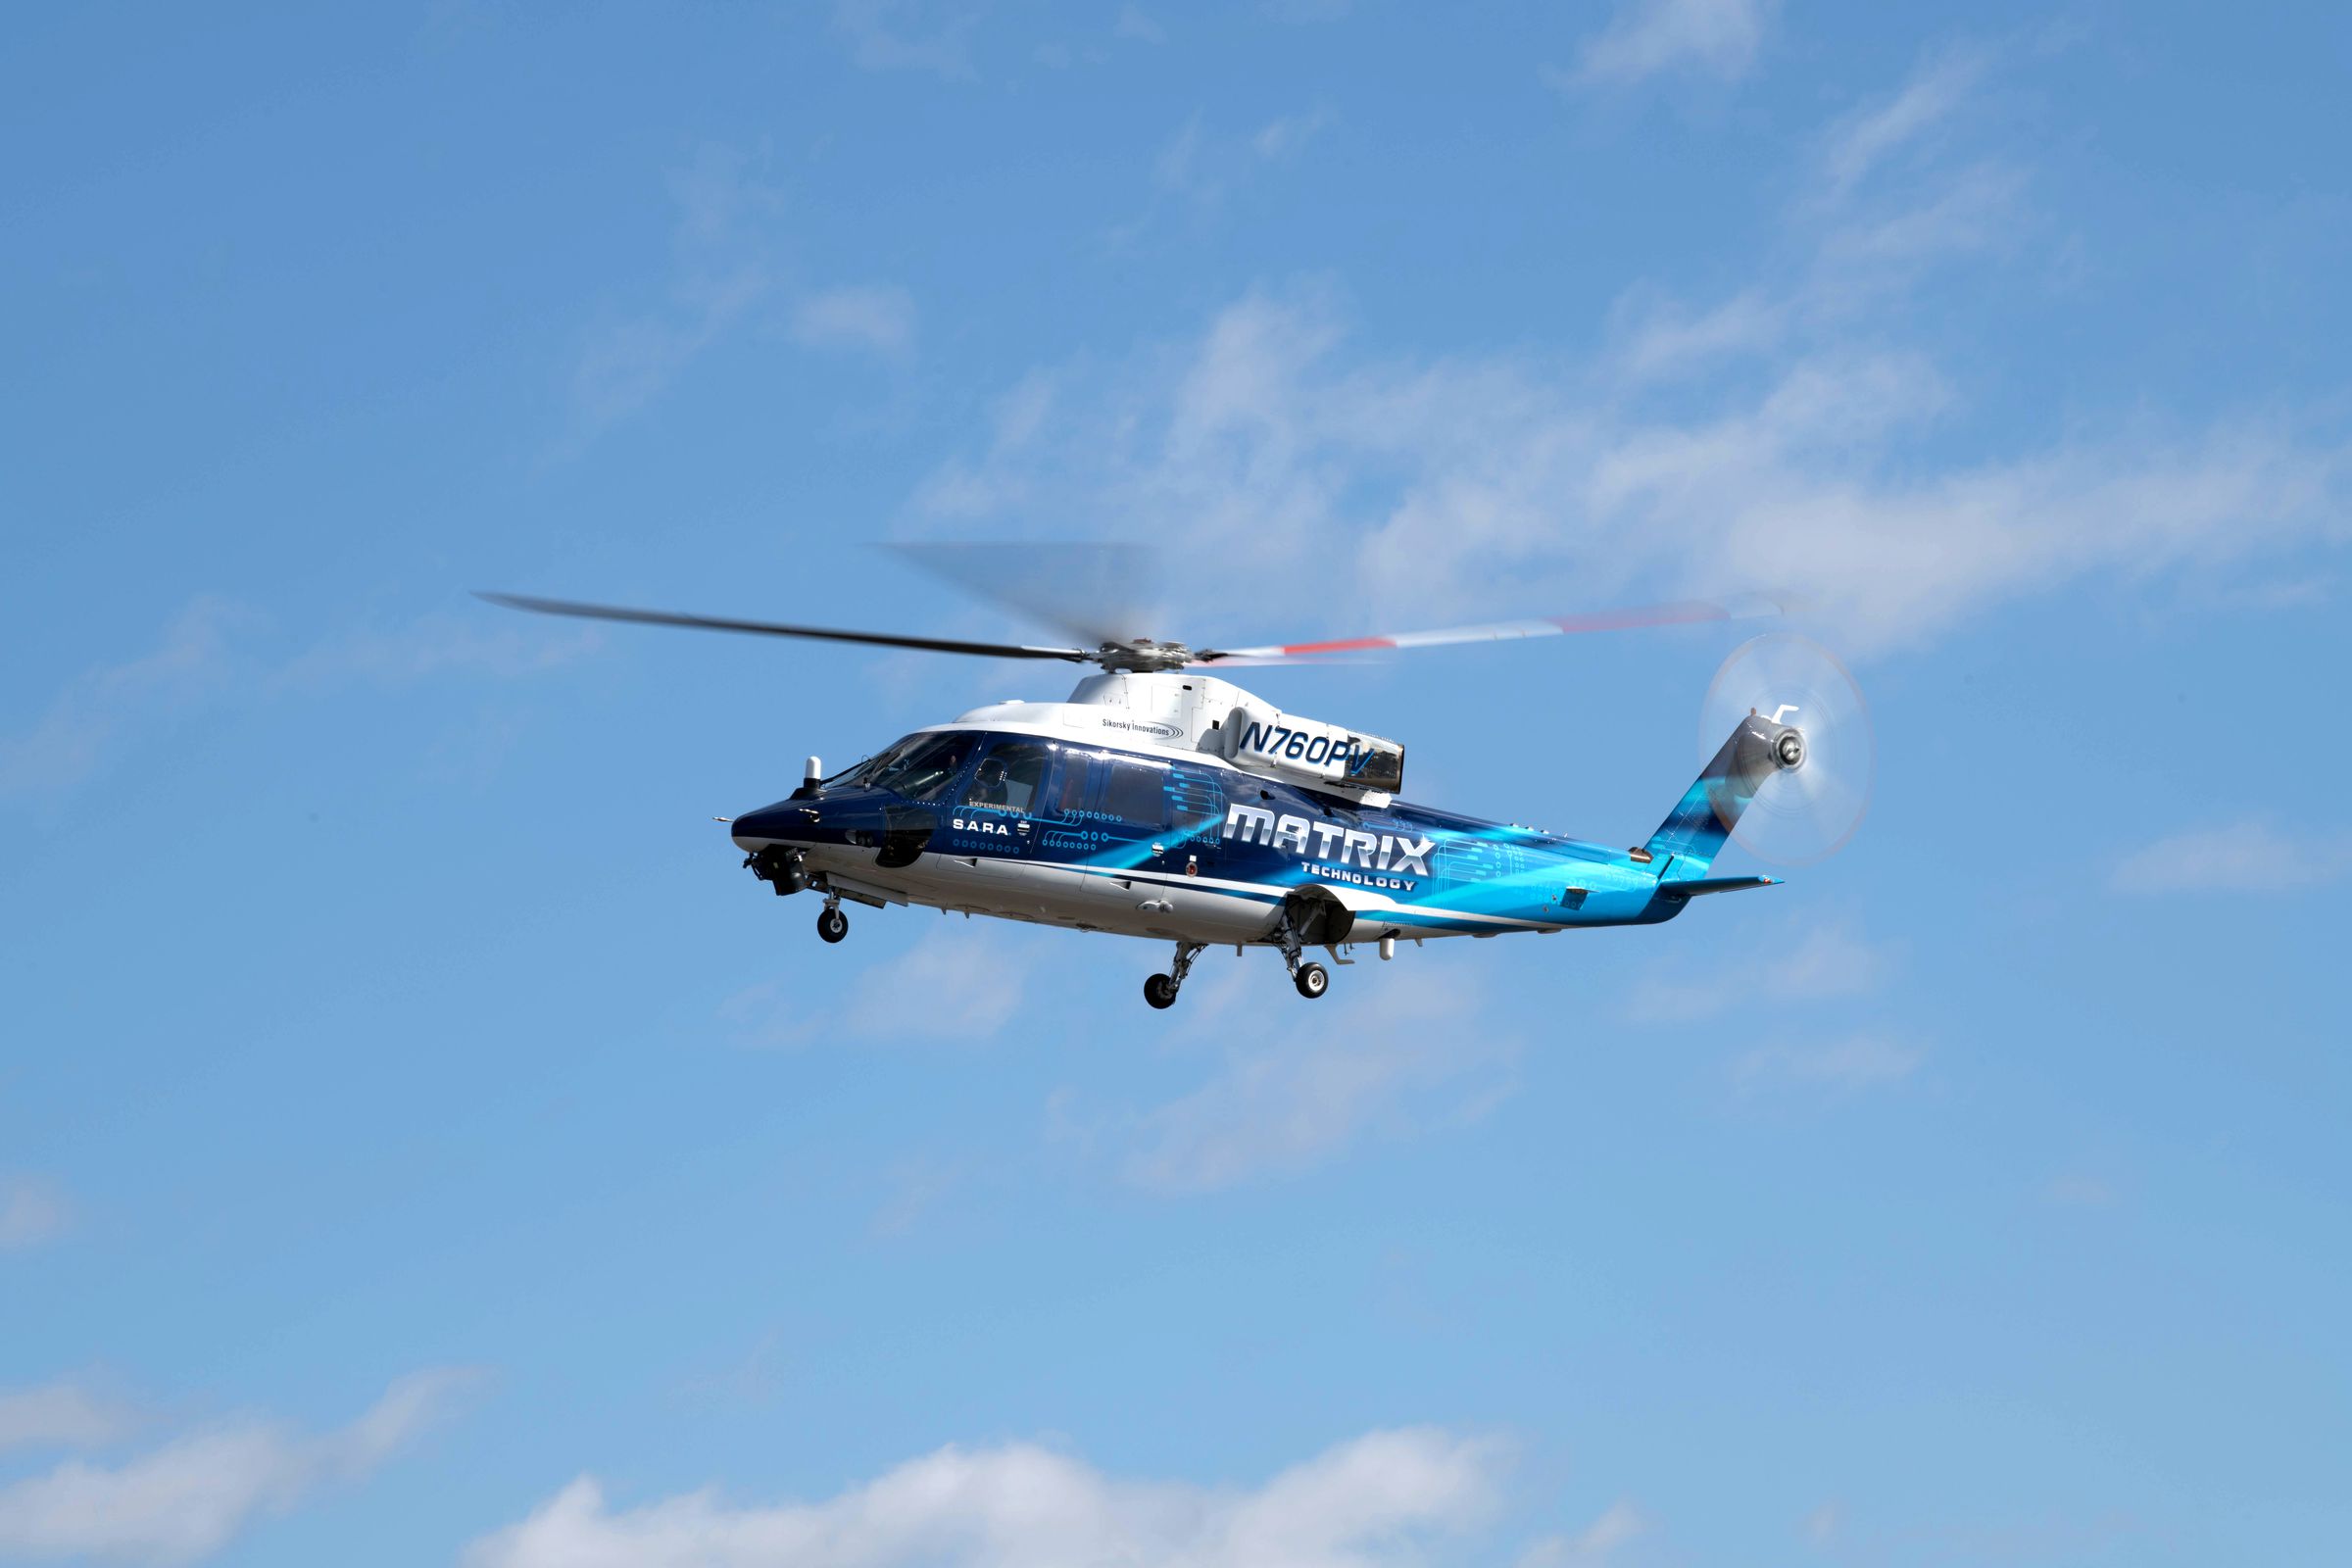 The Sikorsky Autonomy Research Aircraft, or SARA, in flight.